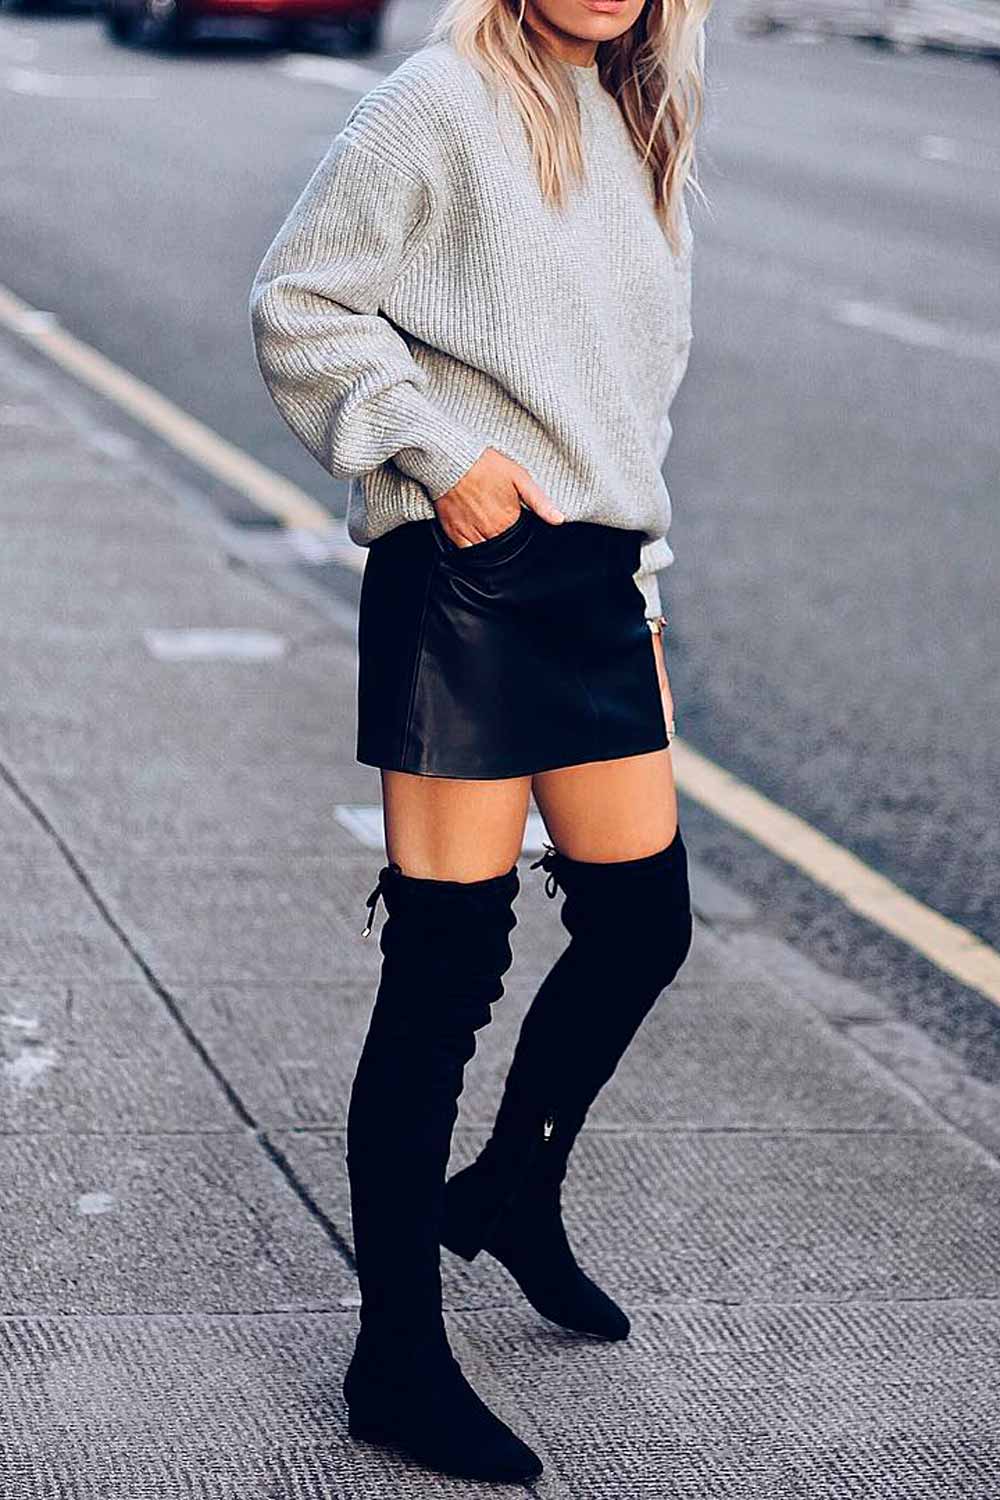 55+ Super Cute Outfits For School To Wear This Fall